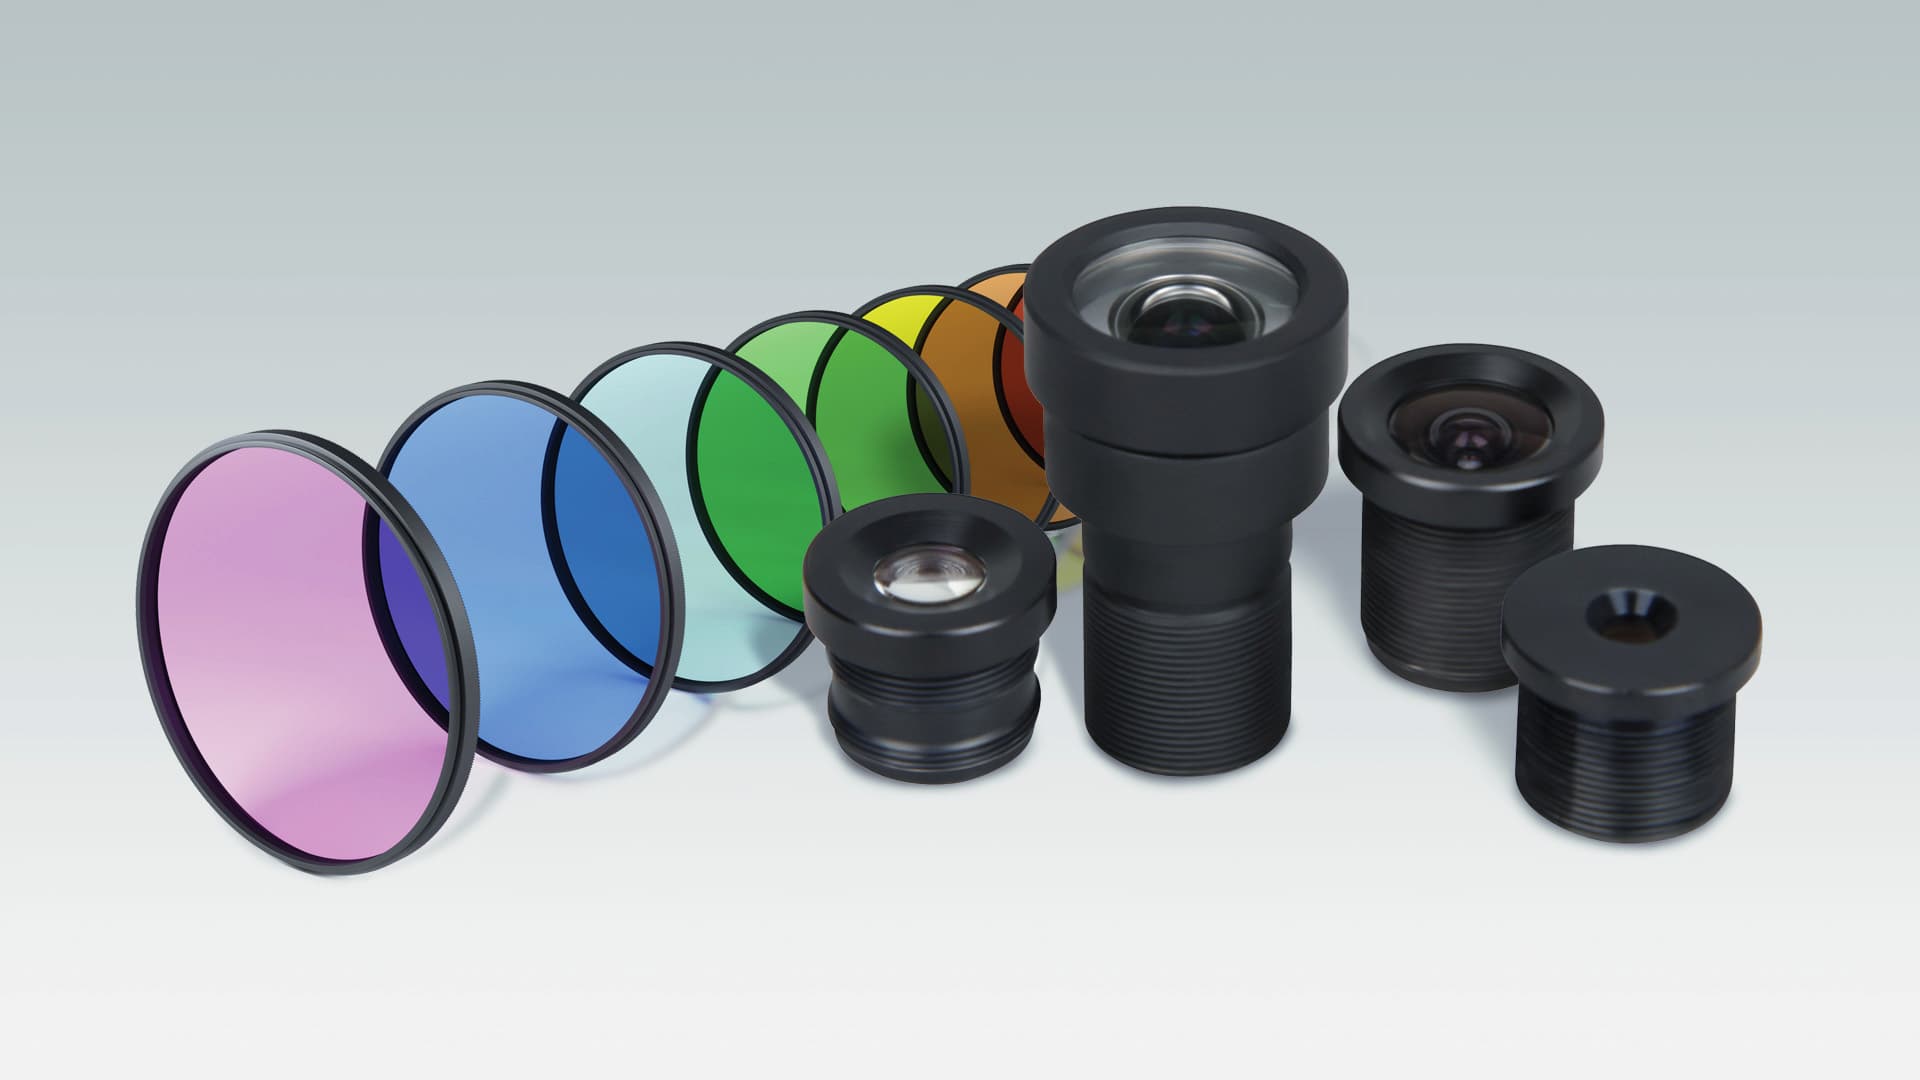 FRAMOS can provide price matching on lenses, optical filters, and other optical components.